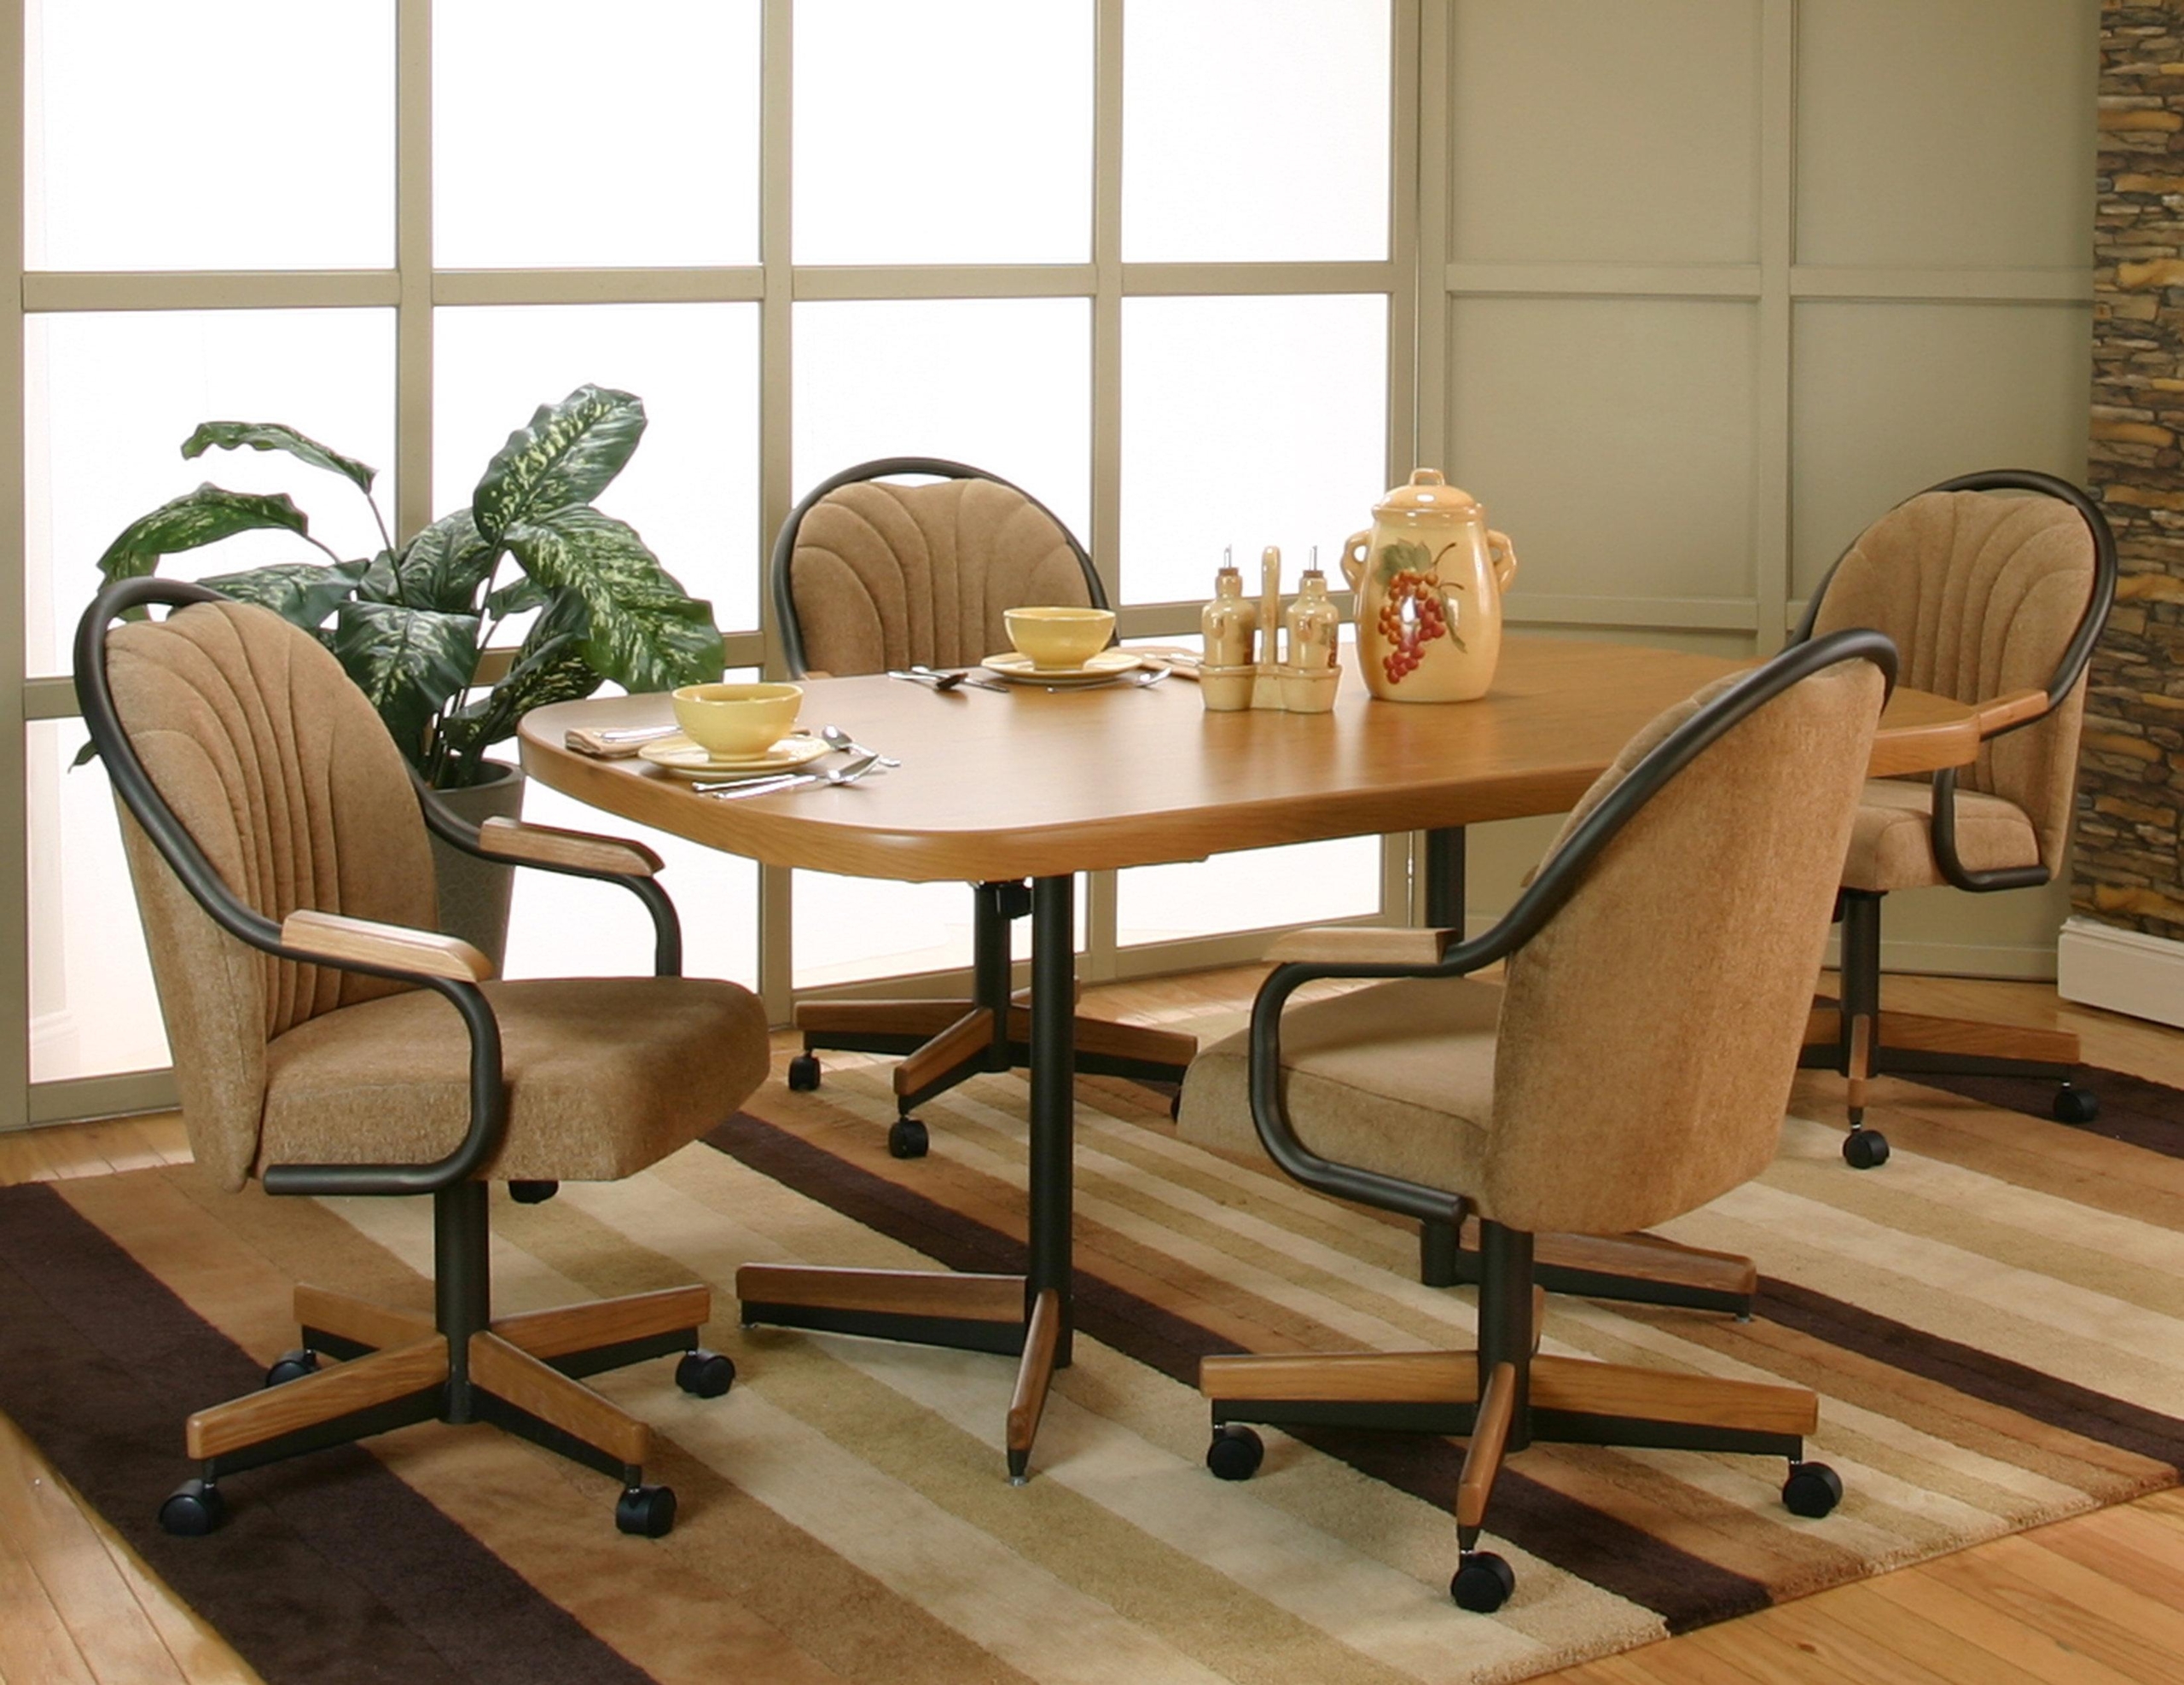 Dinette Sets With Caster Chairs, Dining Room Sets With Wheels On Chairs